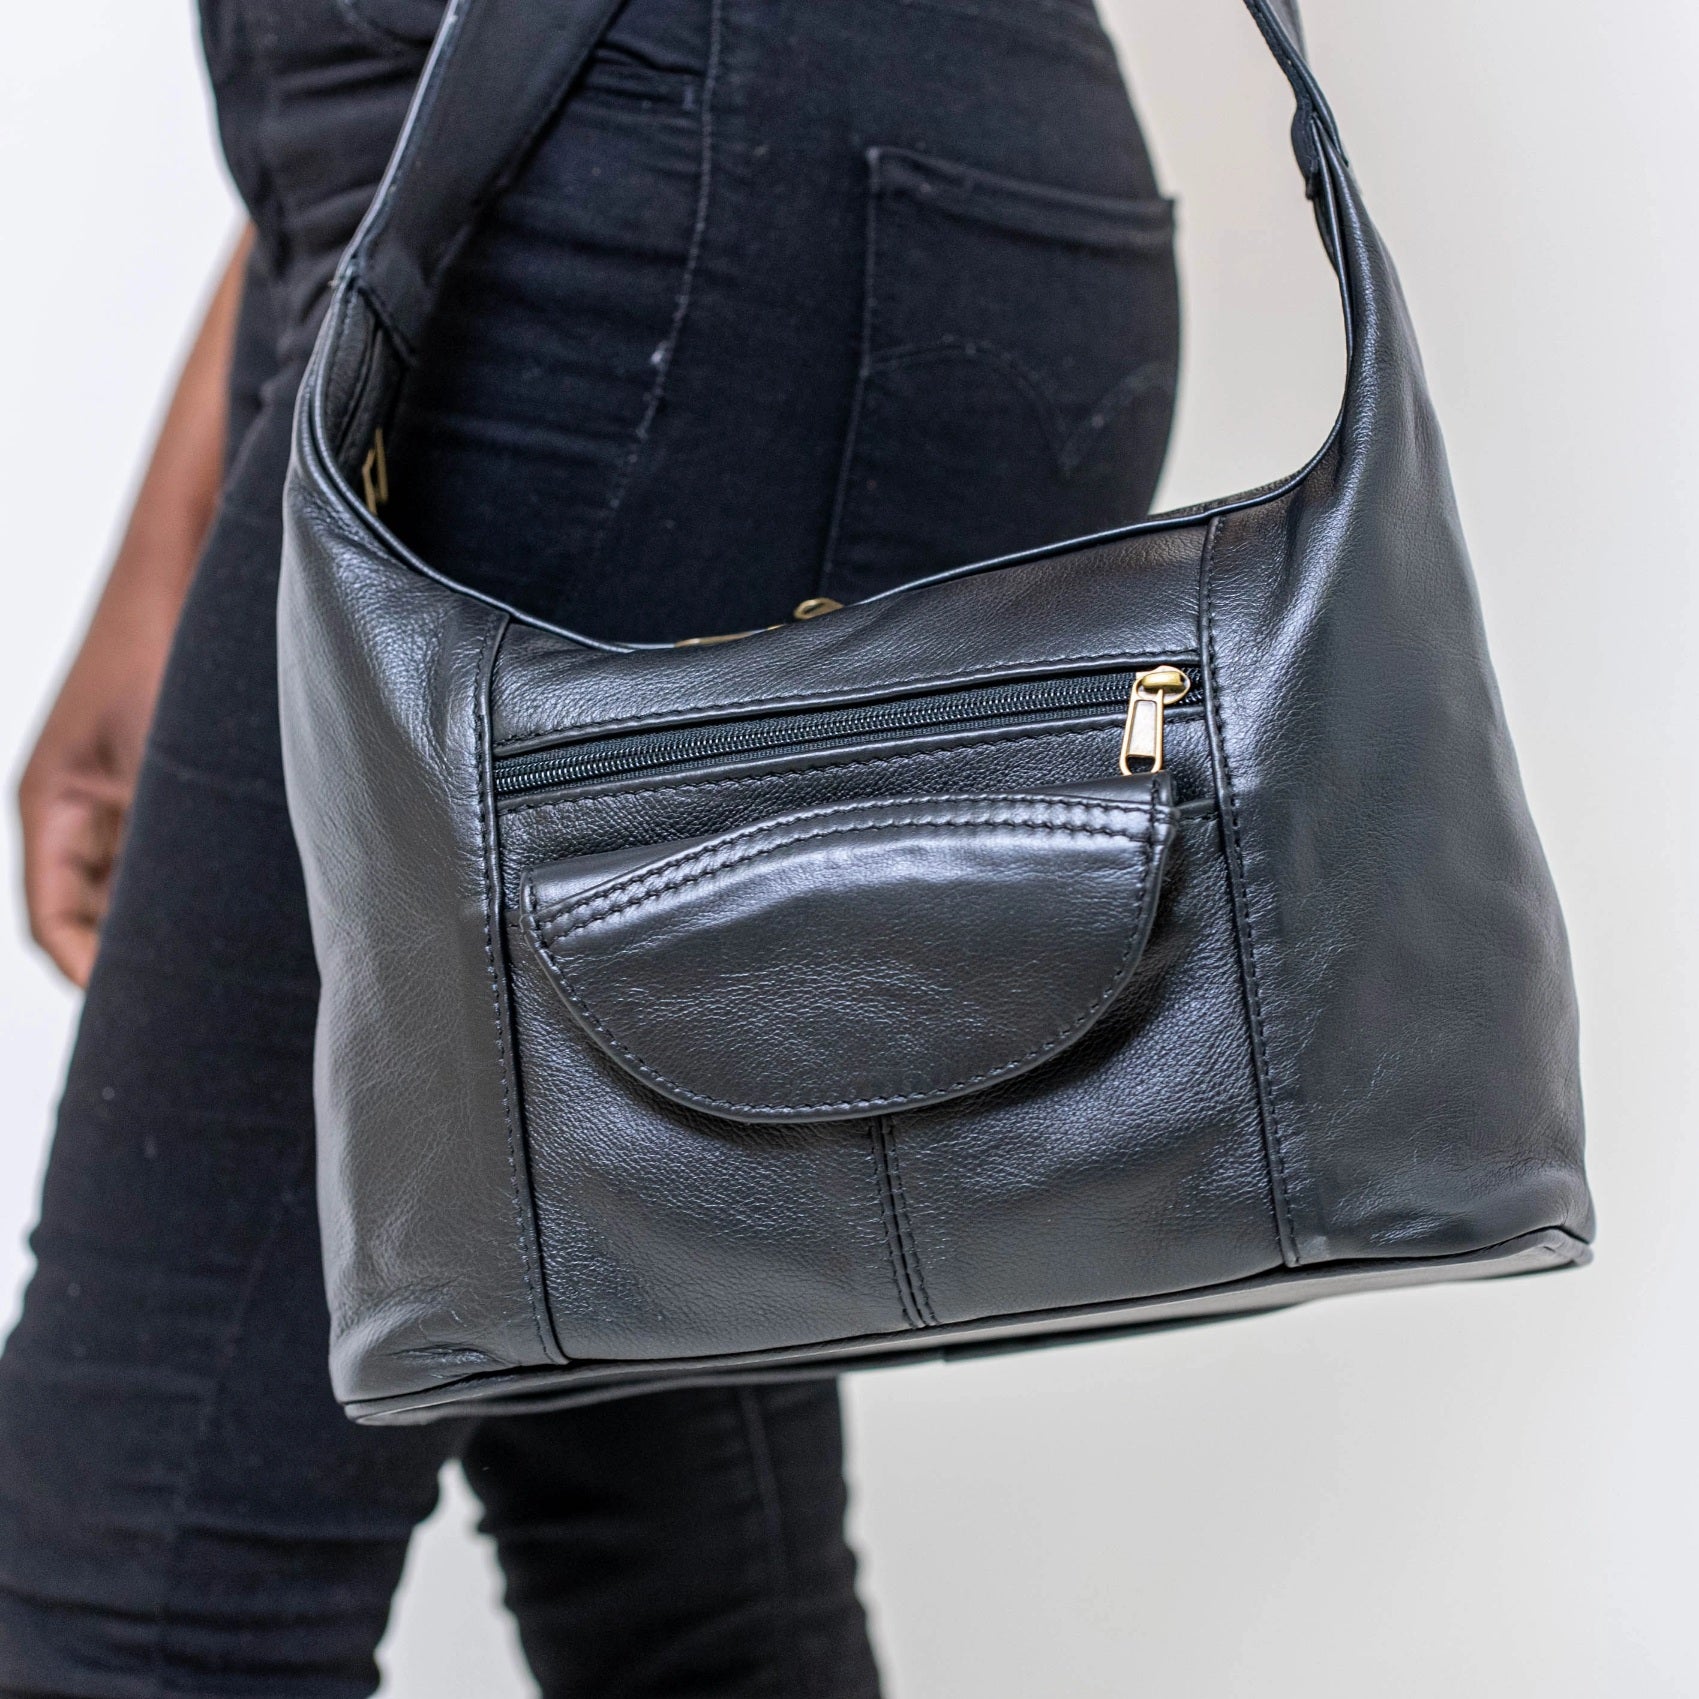 Gb7 leather bags with flap in black colour  made by cape Masai Leather